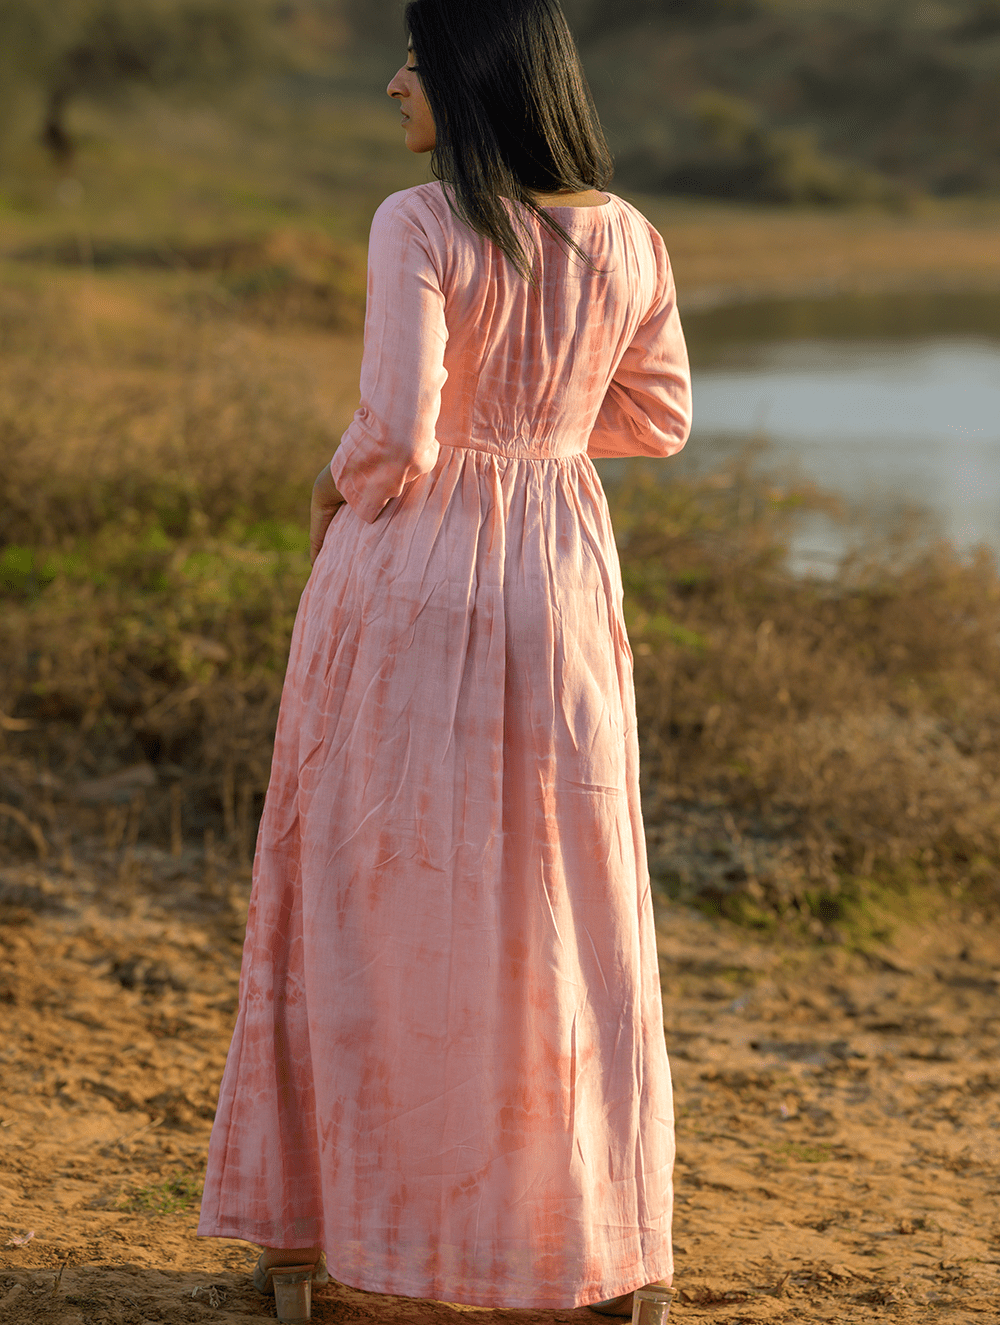 Load image into Gallery viewer, Summer Breeze - Tie &amp; Dye, Soft Mul Peach Bow Dress